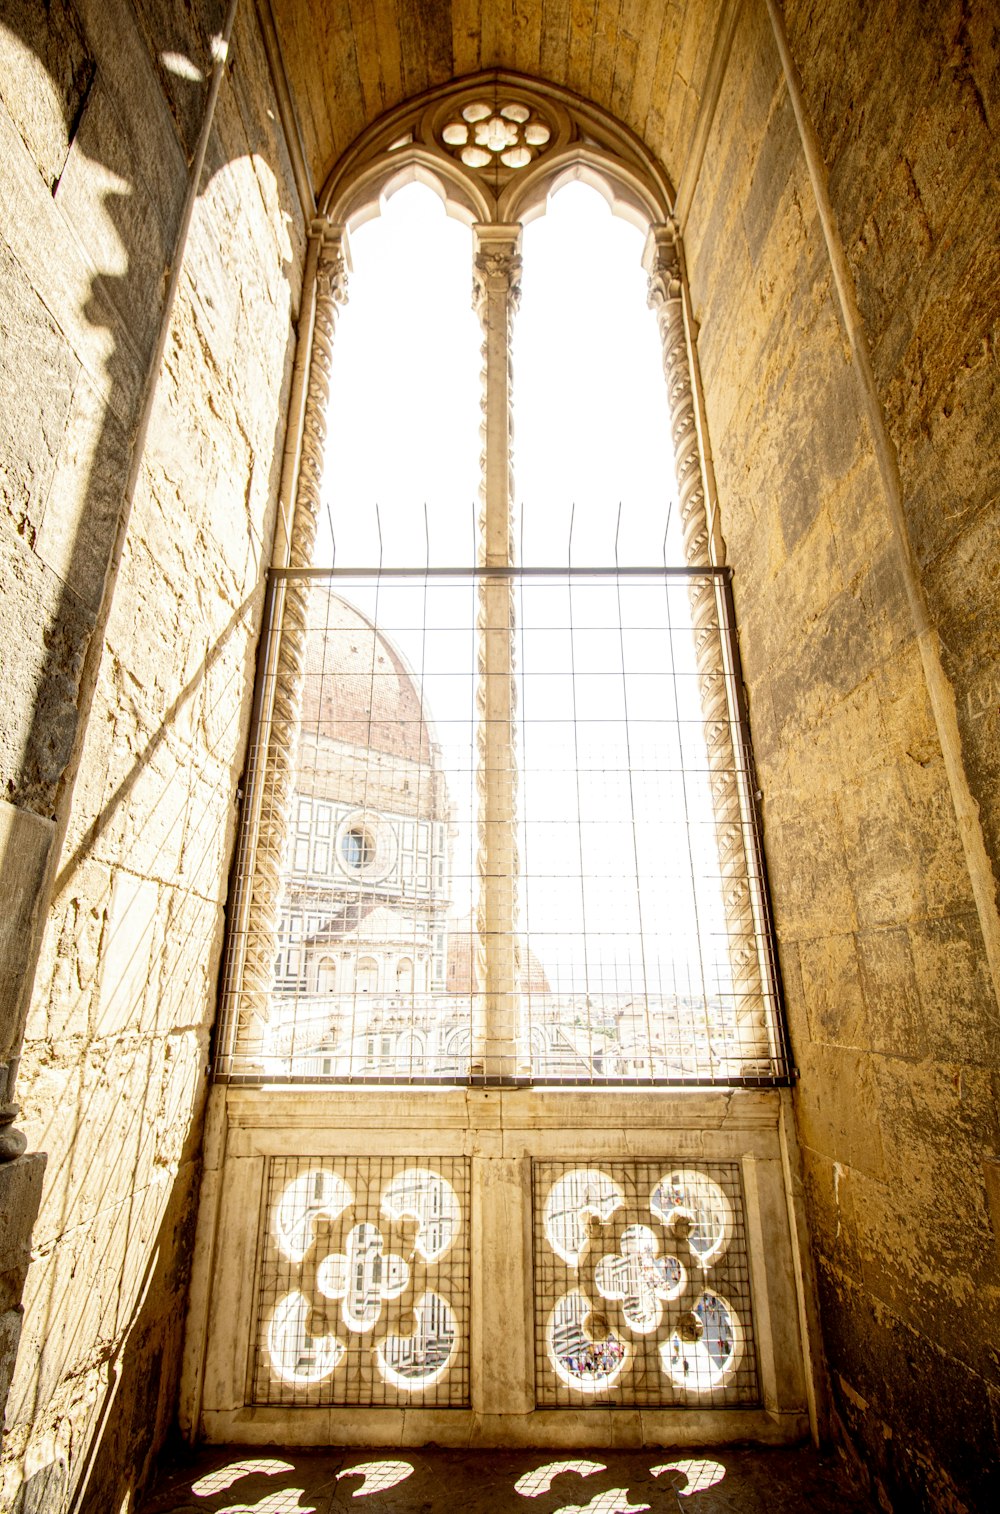 a window in a stone building with a view of a dome